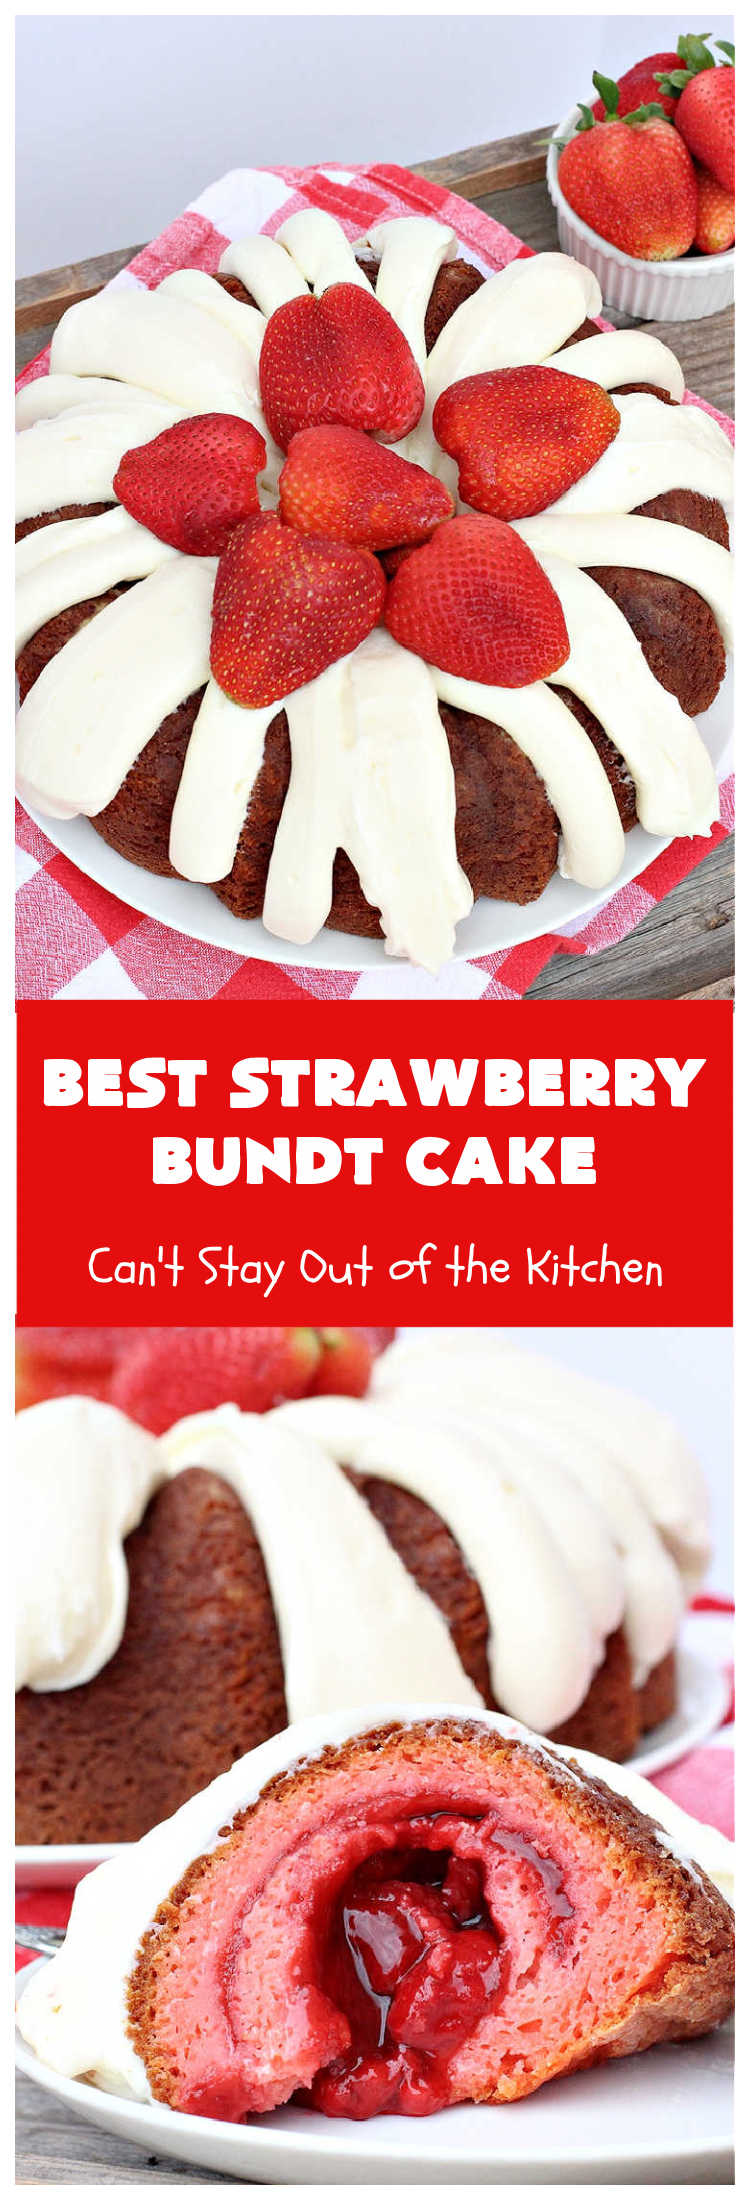 Best Strawberry Bundt Cake | Can't Stay Out of the Kitchen | This is a better version that #NothingBundtCakes that will wow your friends and knock your socks off! This delectable #cake is rich, decadent & heavenly. It's made with #Strawberry cake mix, strawberry jello & #StrawberryPieFilling. The #CreamCheese icing is luscious & irresistible! #StrawberryBundtCake #dessert #StrawberryDessert #holiday #HolidayDessert #BestStrawberryBundtCake 